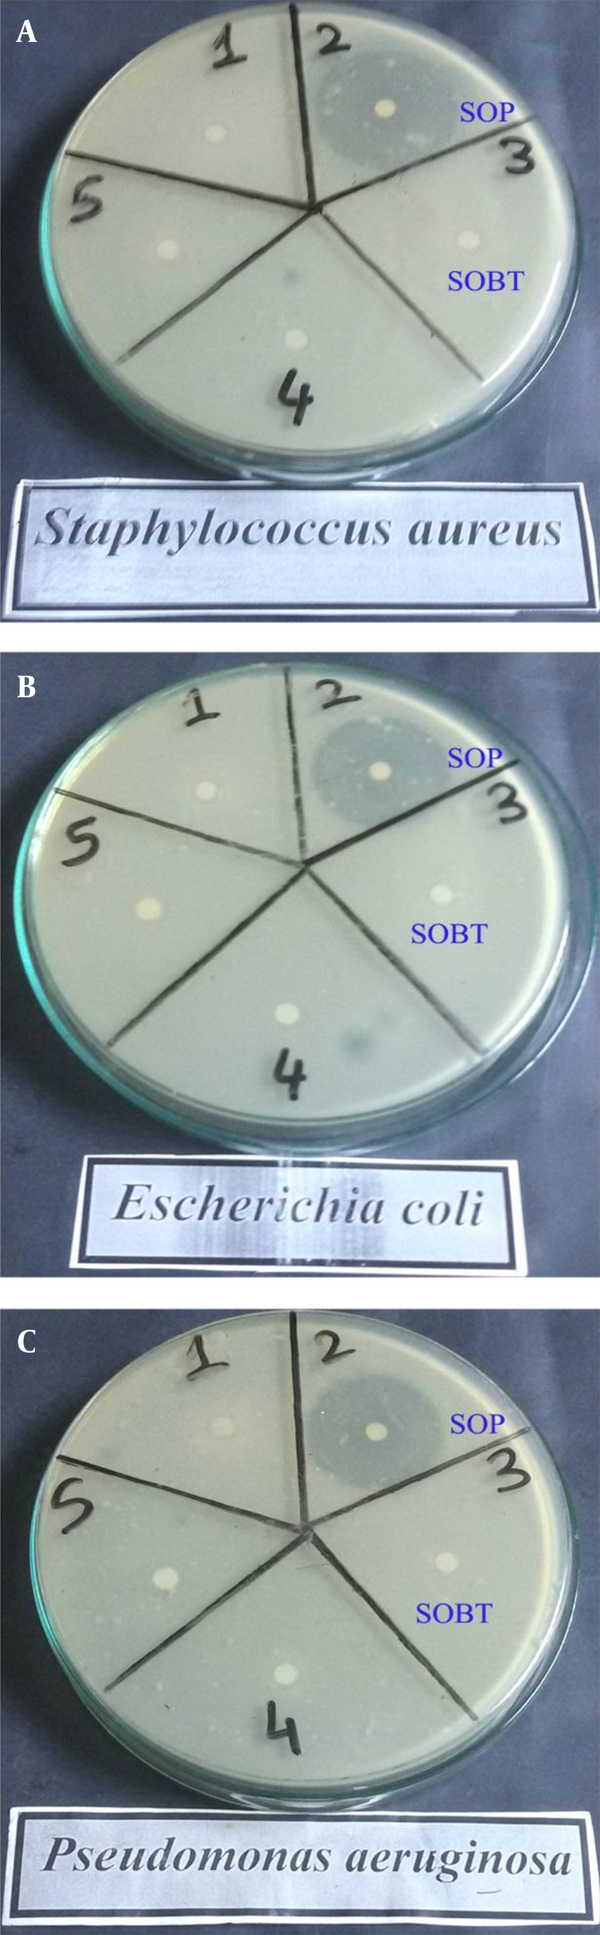 Antibacterial Activity of SOBT and SOP Extracts Against Different Gram-Positive and Gram-Negative Bacteria